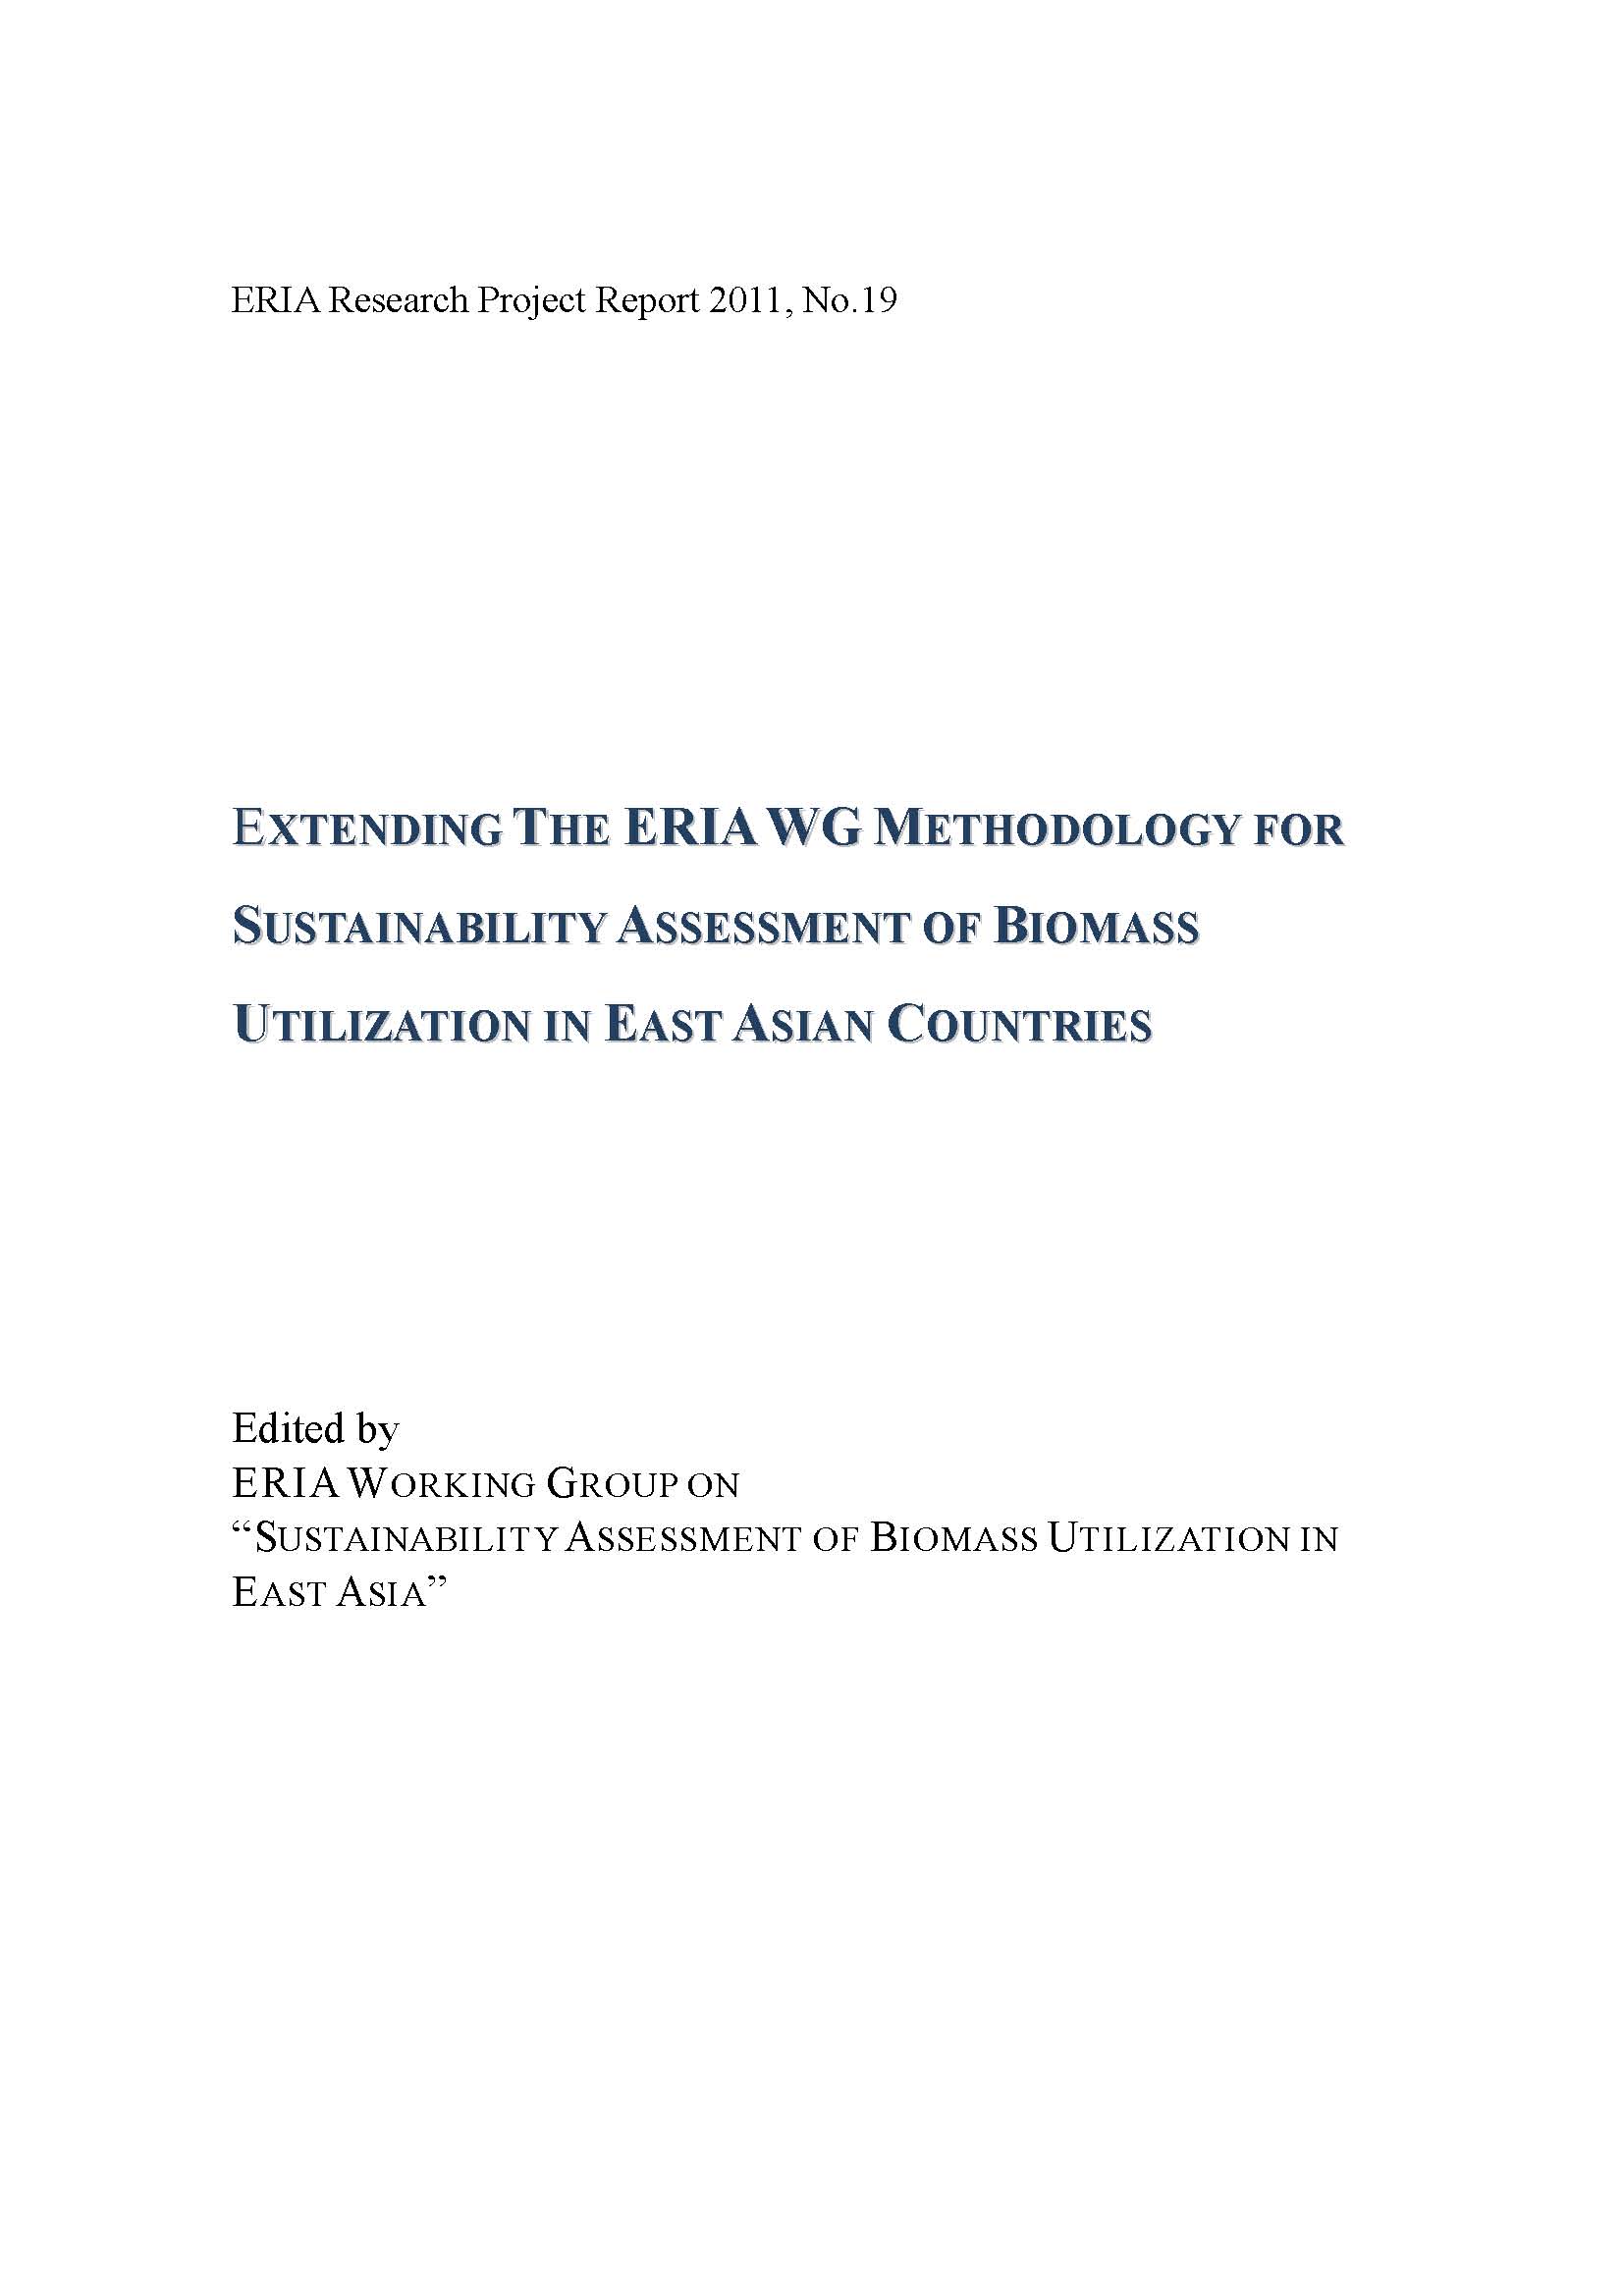 Extending the ERIA WG Methodology for Sustainability Assessment of Biomass Utilization in East Asian Countries